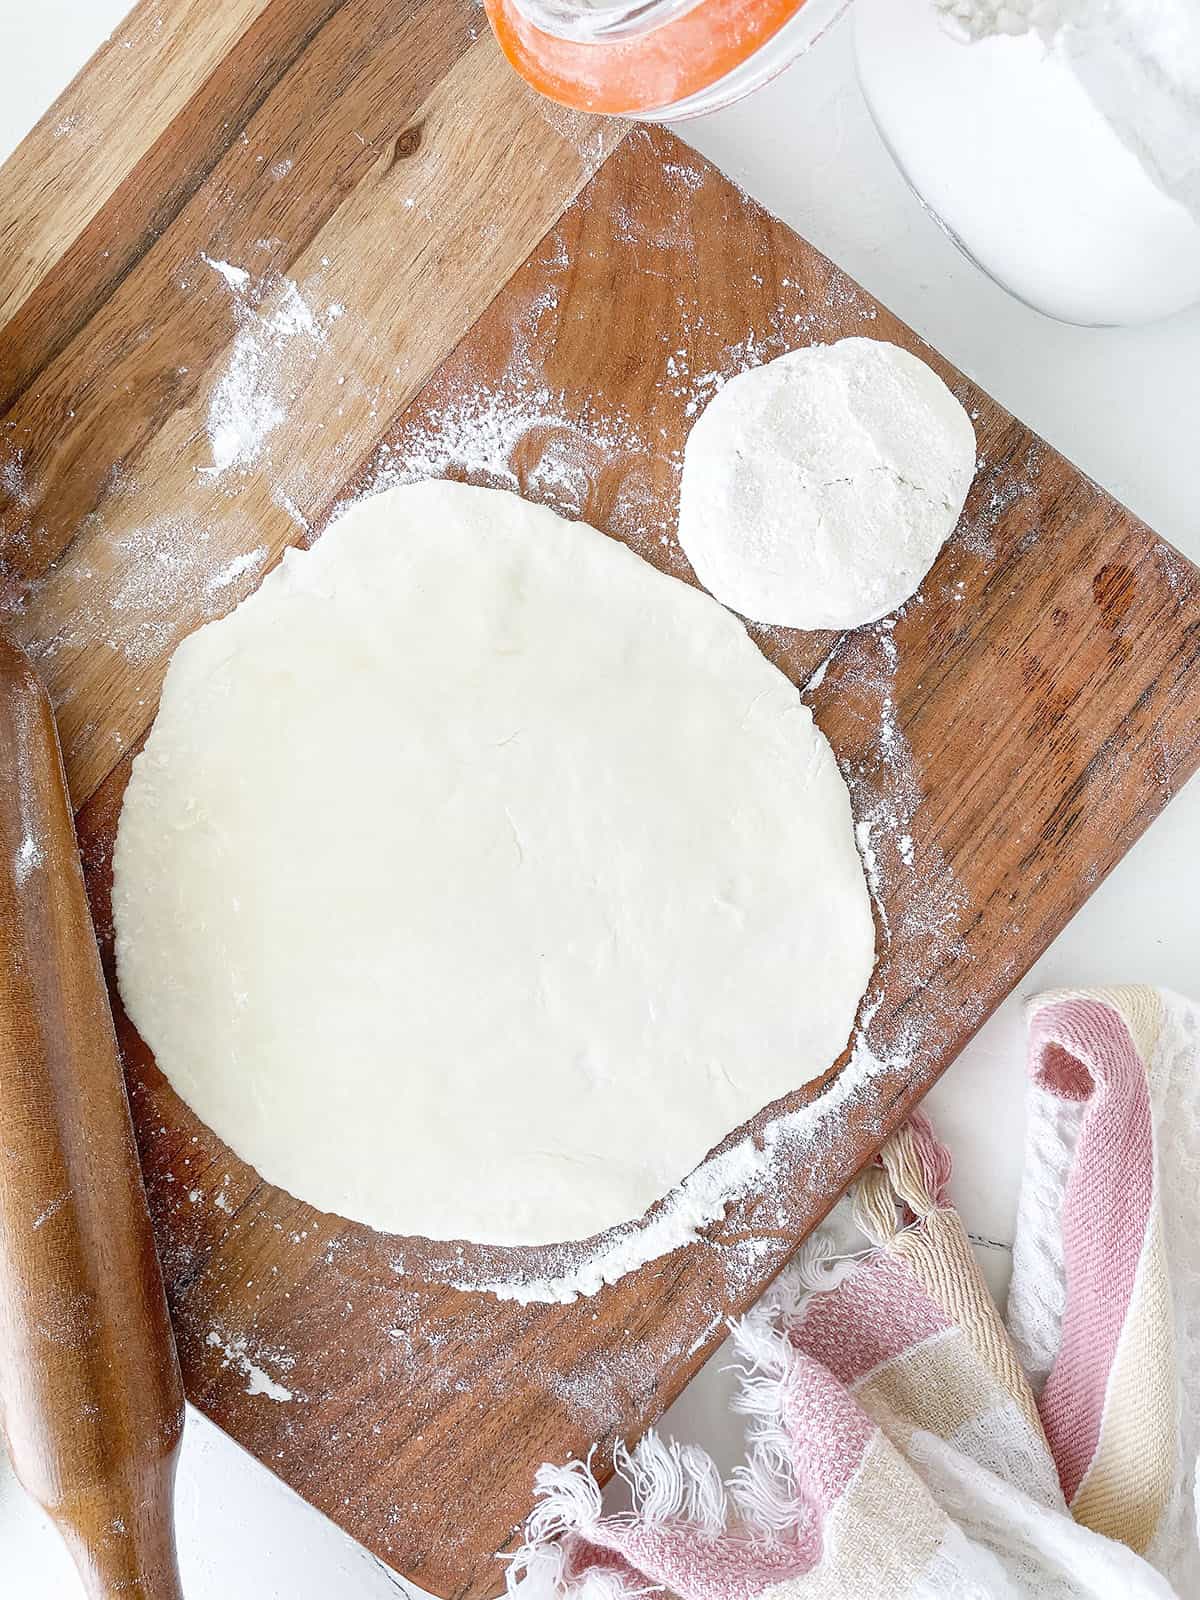 The dough ball is rolled out thin. The rolling pin is on the left side with a towel at the bottom of the cutting board.